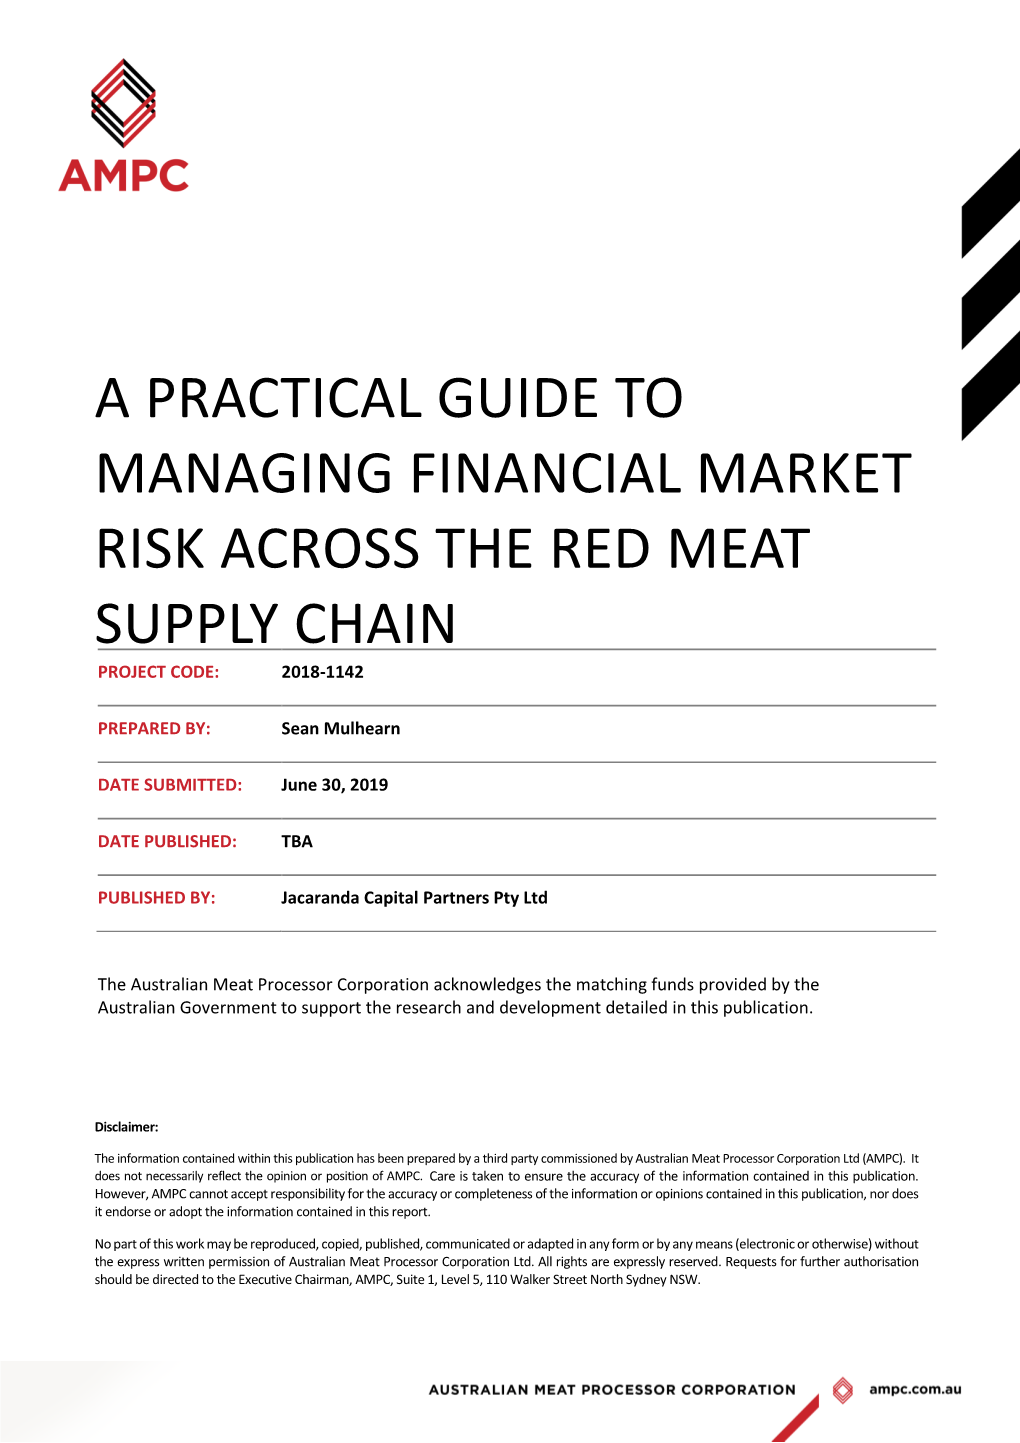 Managing Risk Across the Red Meat Supply Chain